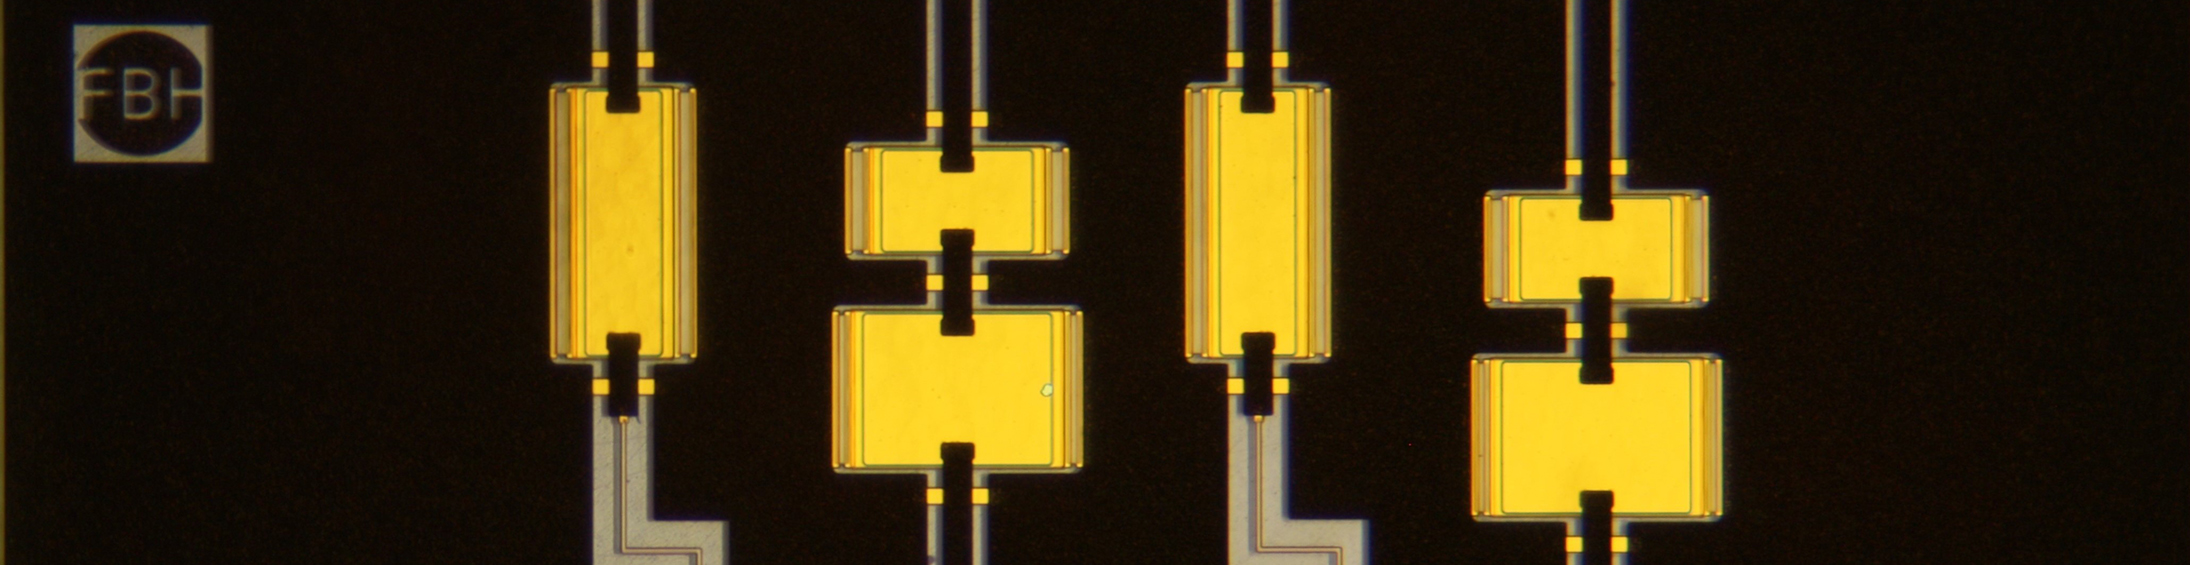 Microscope photograph of the fabricated LNA